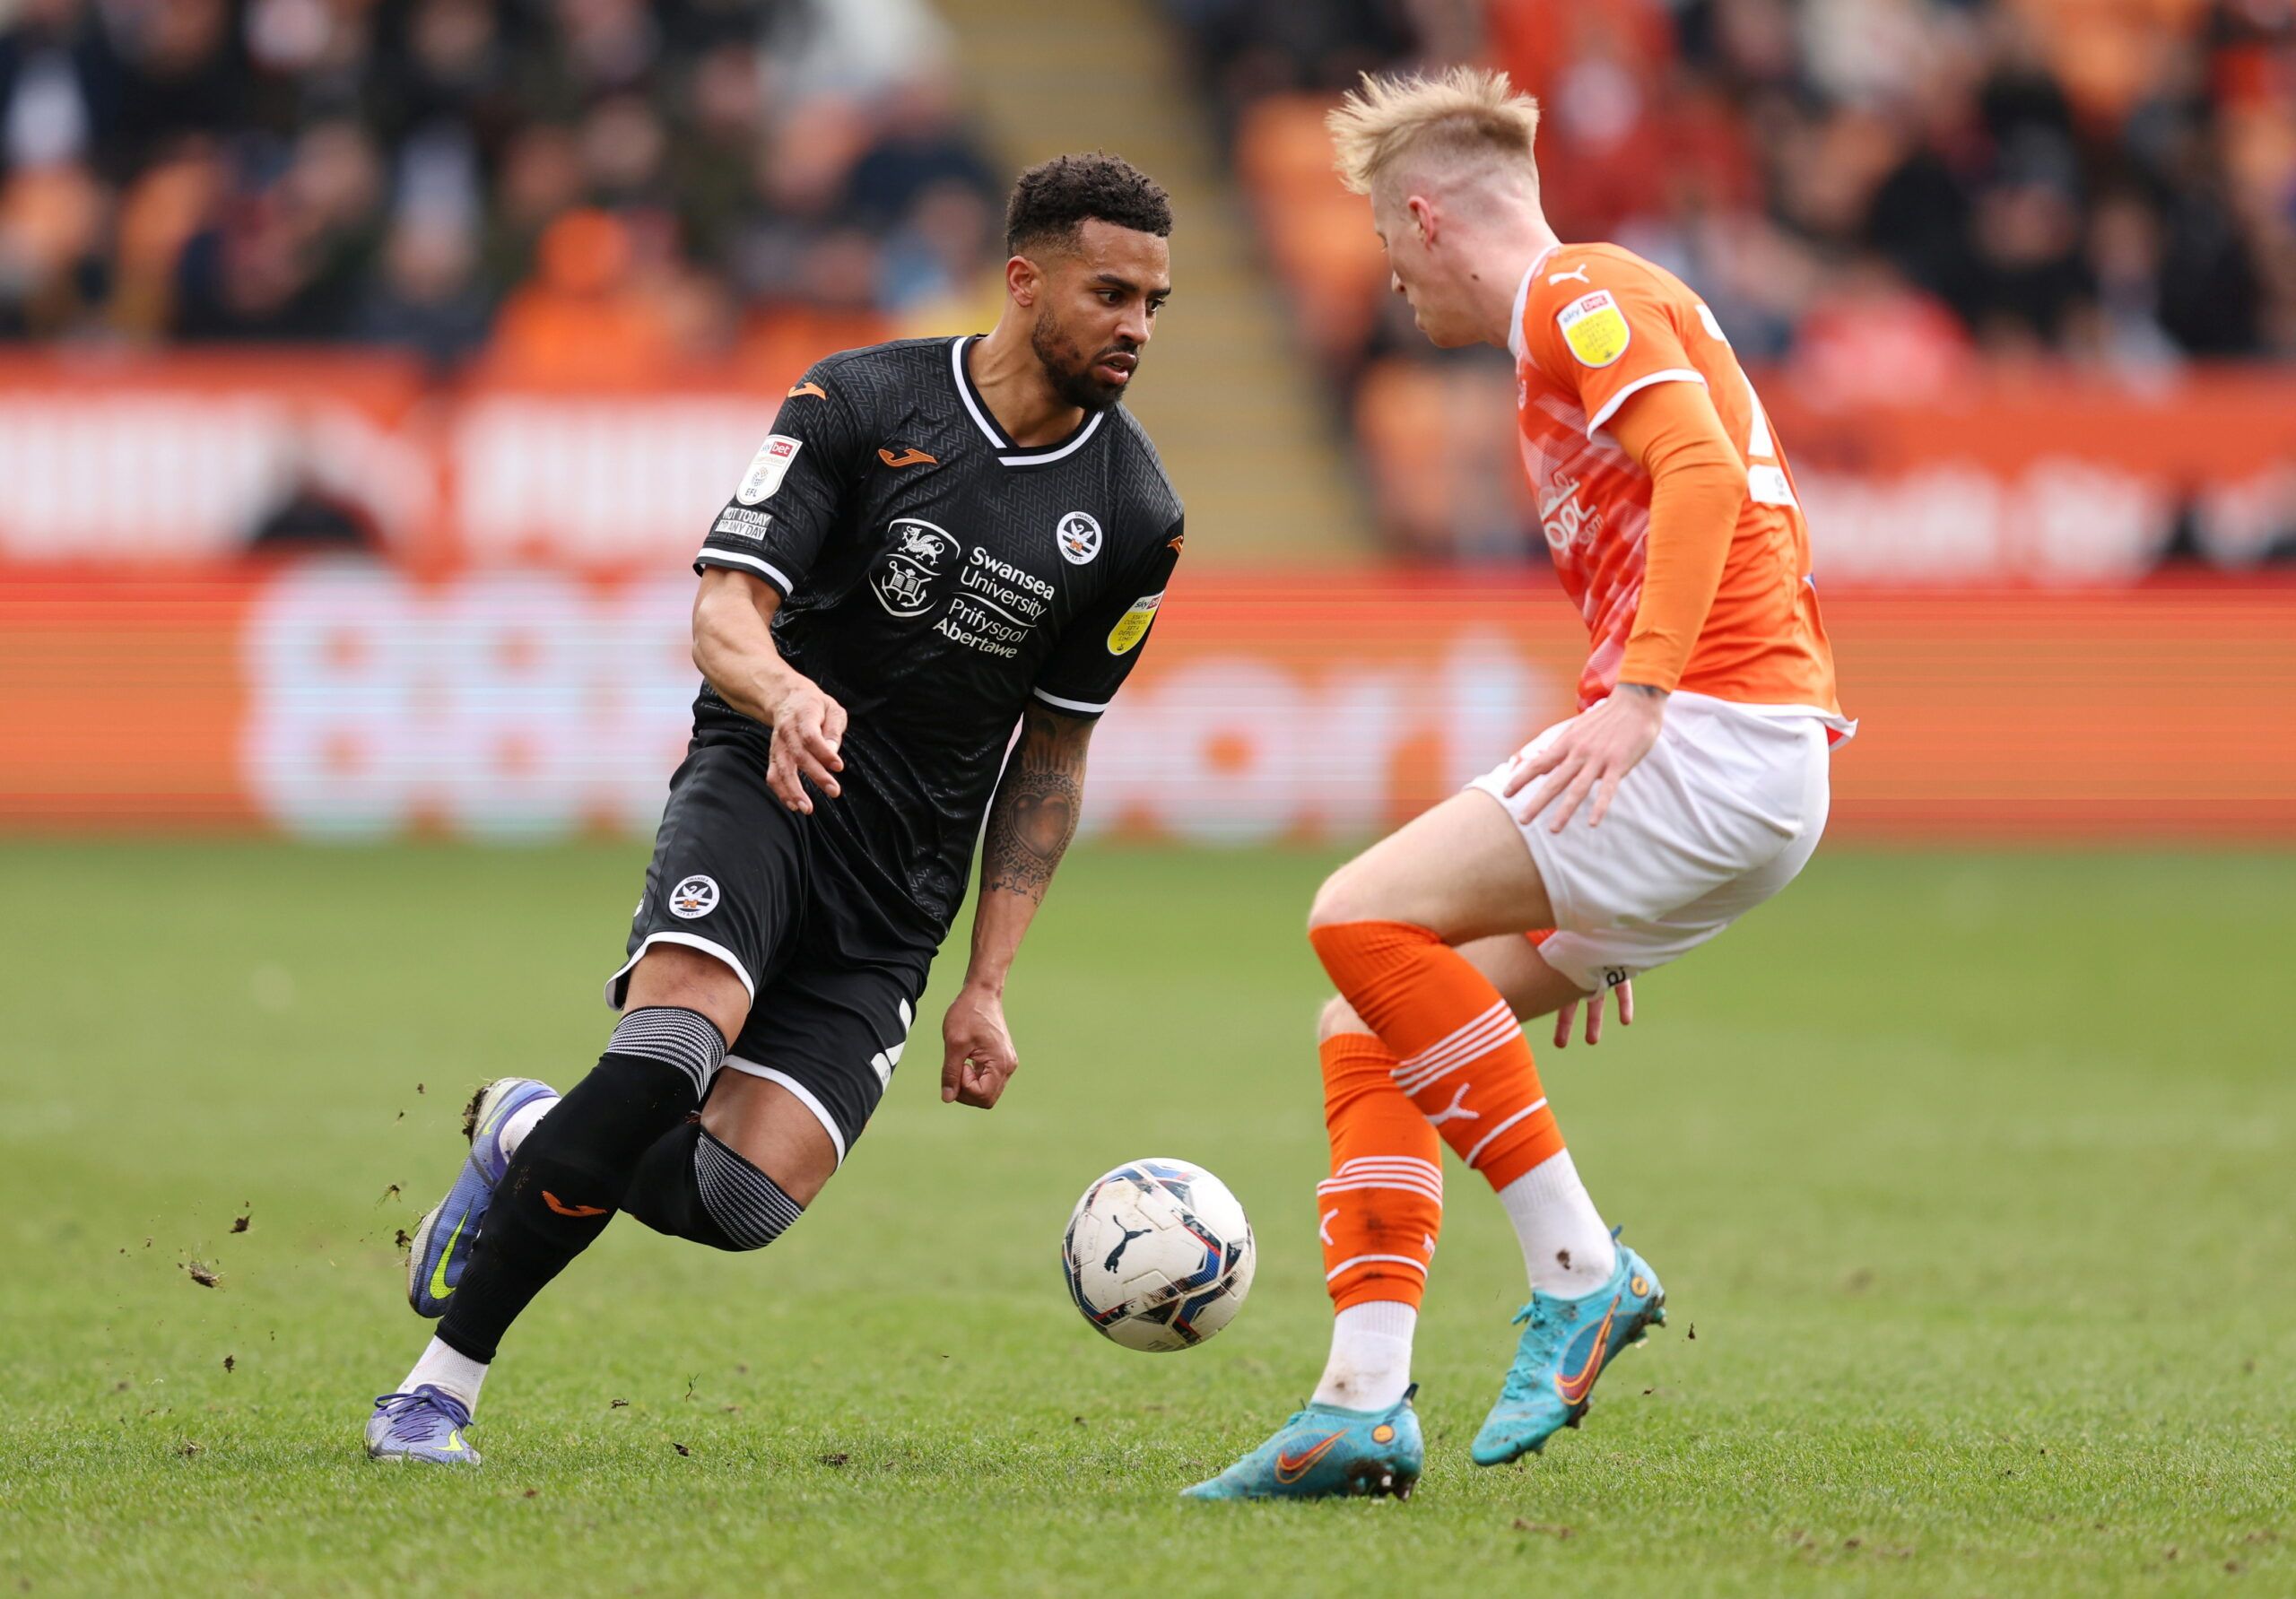 Soccer Football - Championship - Blackpool v Swansea City - Bloomfield Road, Blackpool , Britain - March 12, 2022  Swansea City's Cyrus Christie in action with Blackpool's Charlie Kirk  Action Images/John Clifton  EDITORIAL USE ONLY. No use with unauthorized audio, video, data, fixture lists, club/league logos or 